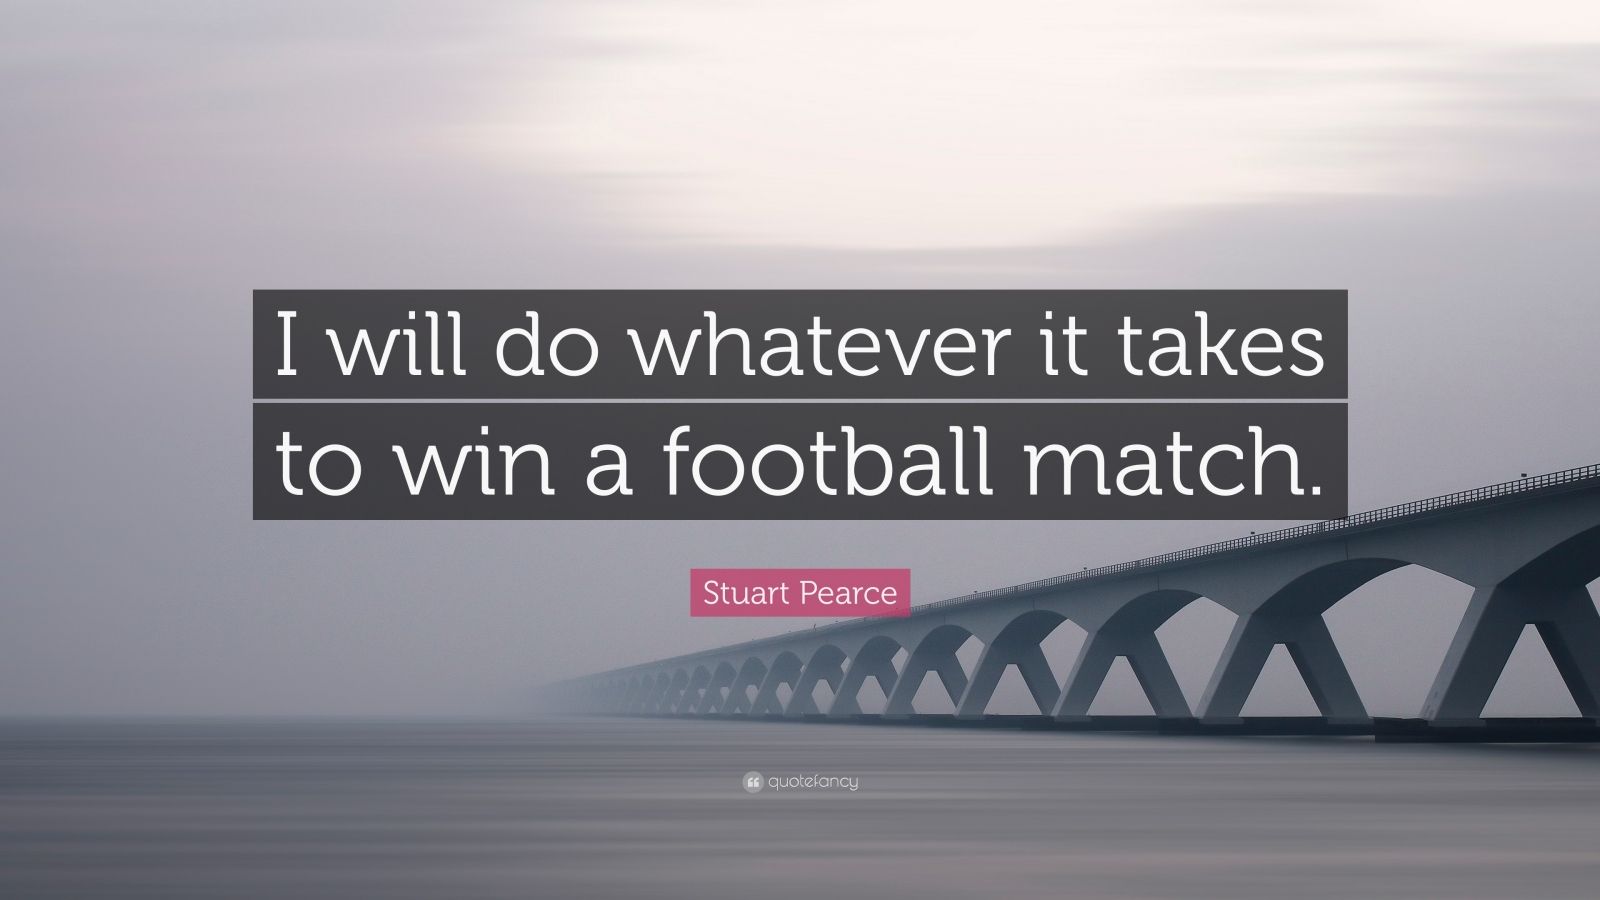 Stuart Pearce Quote: "I will do whatever it takes to win a ...